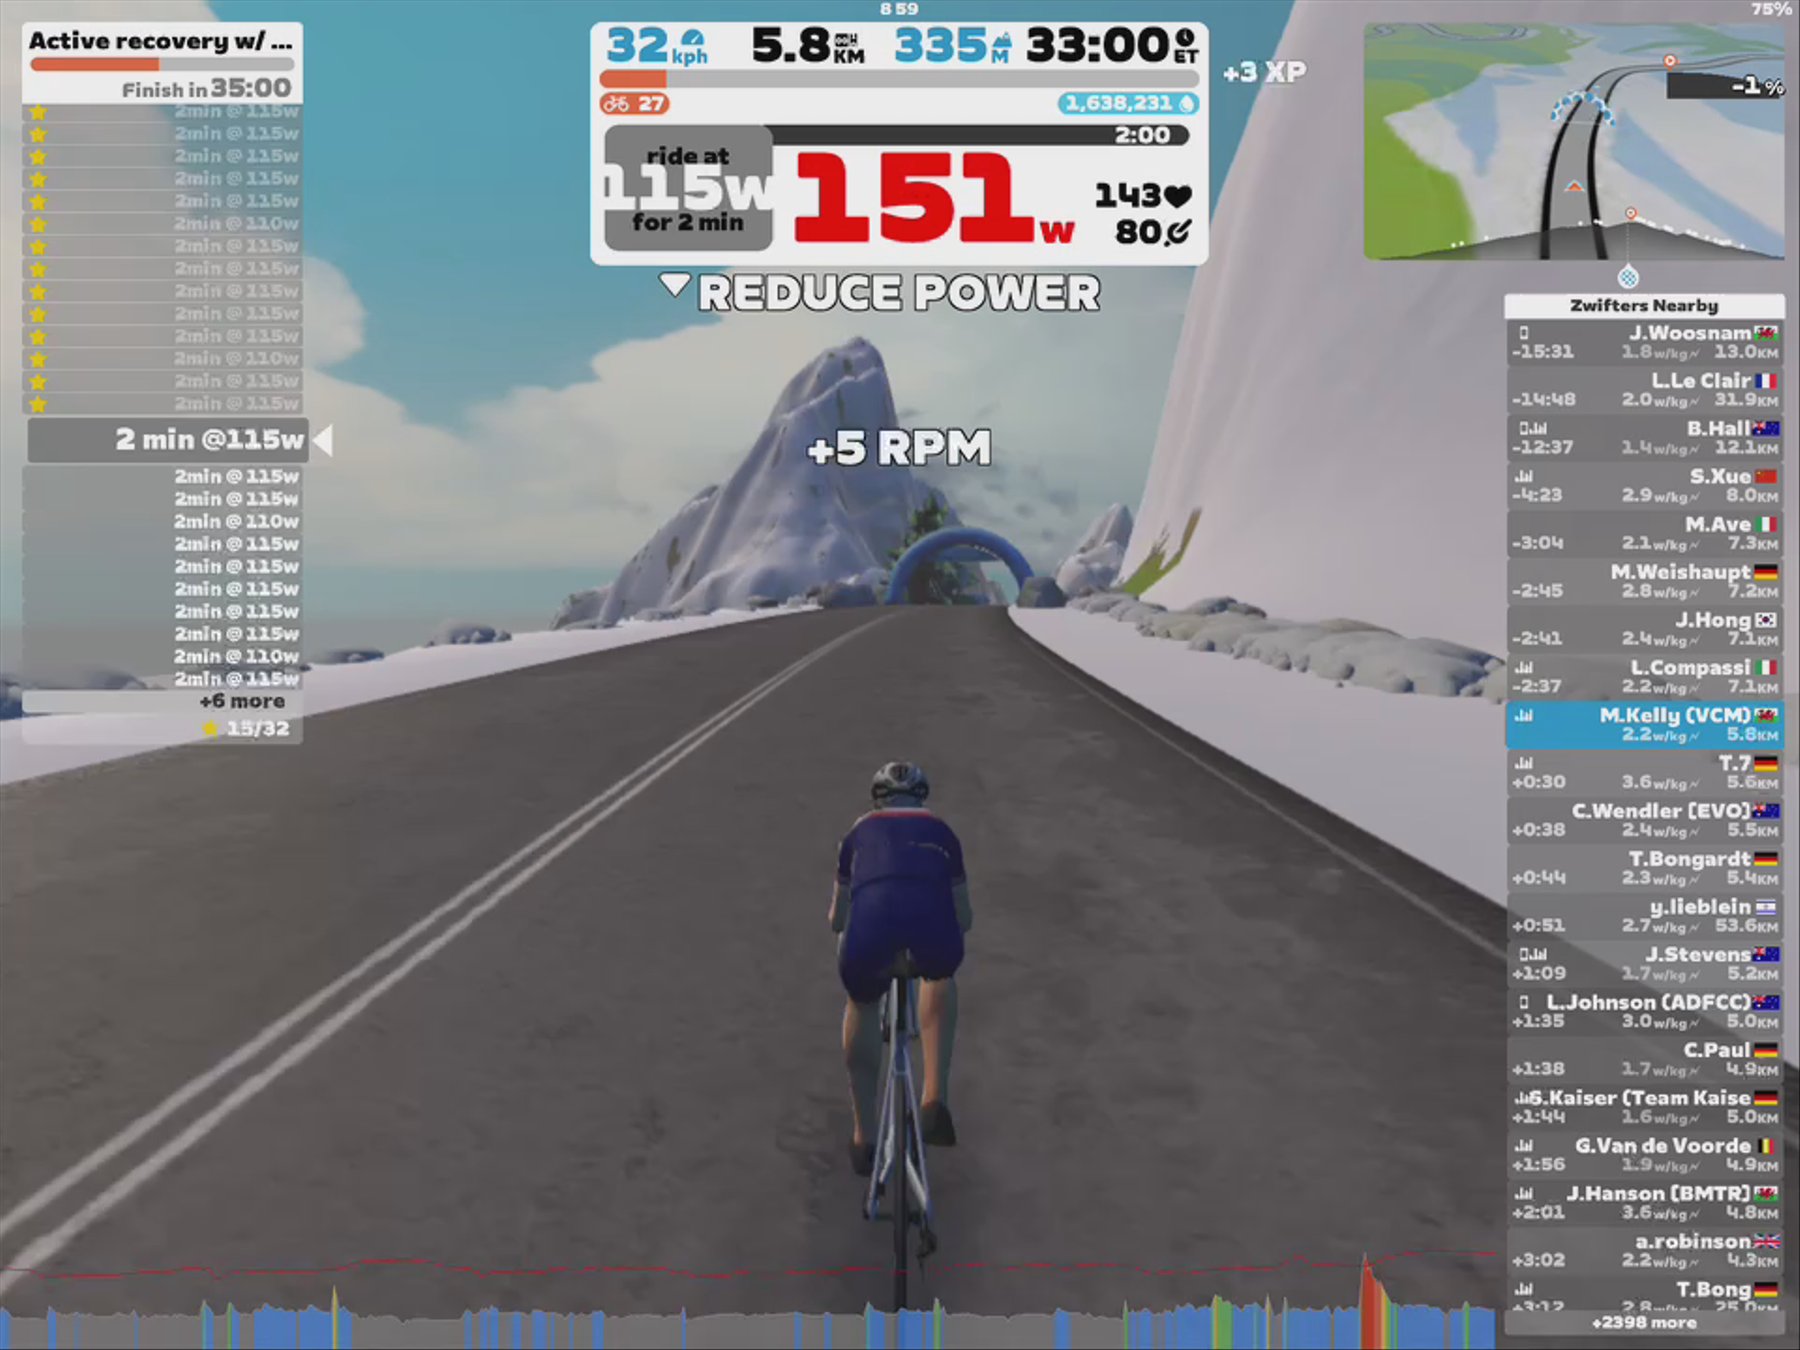 Zwift - Active recovery w/ 2min cadence-5 in Watopia